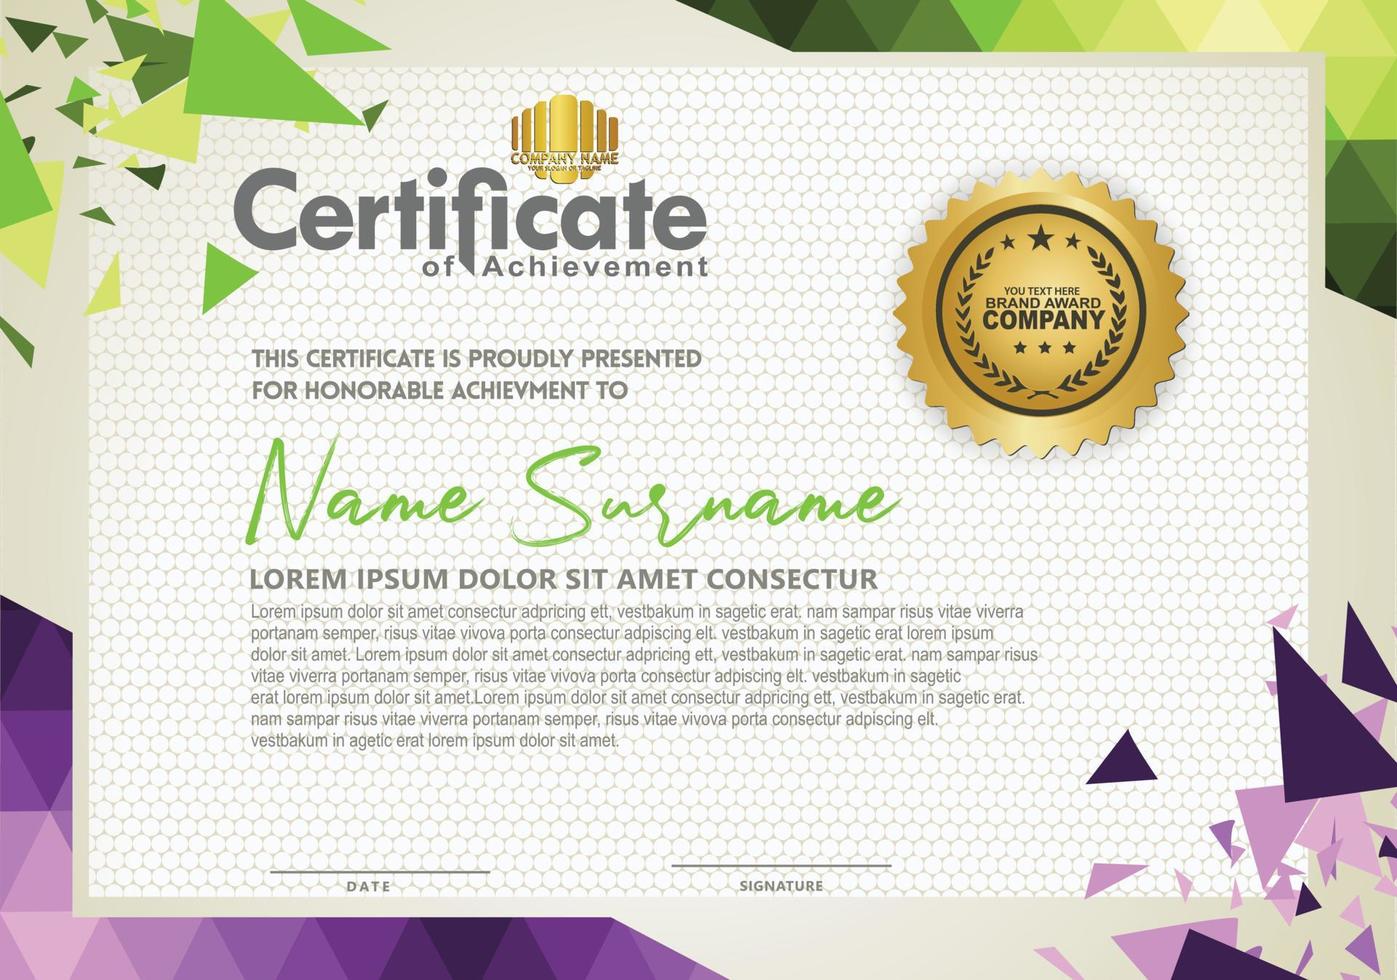 Horizontal certificate template with triangle geometric polygonal background, vector